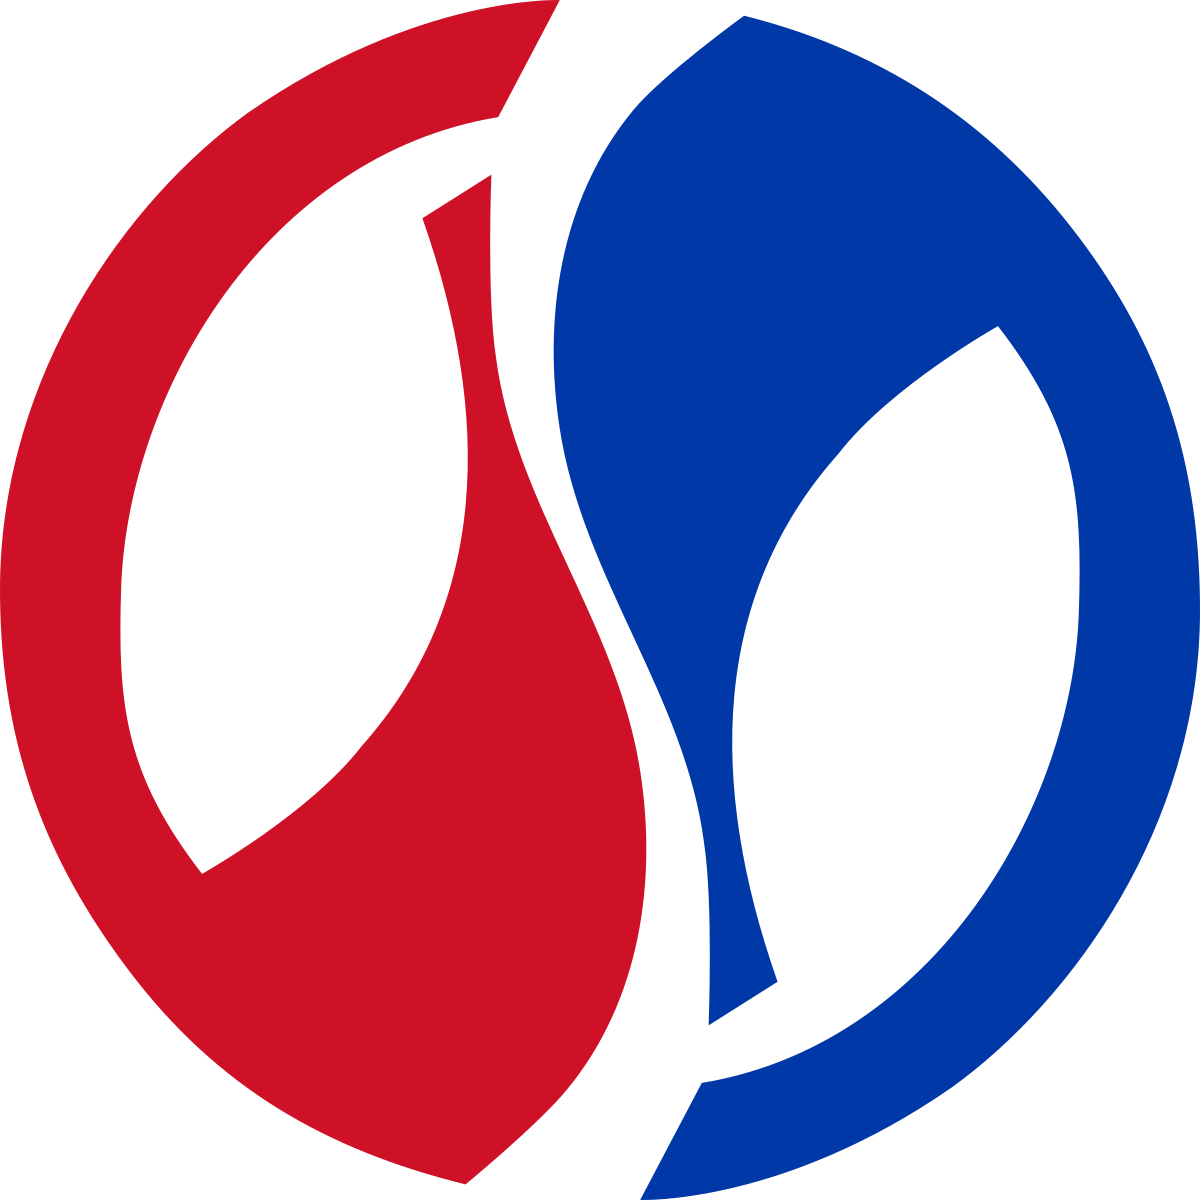 File:National Food Authority (NFA).svg.